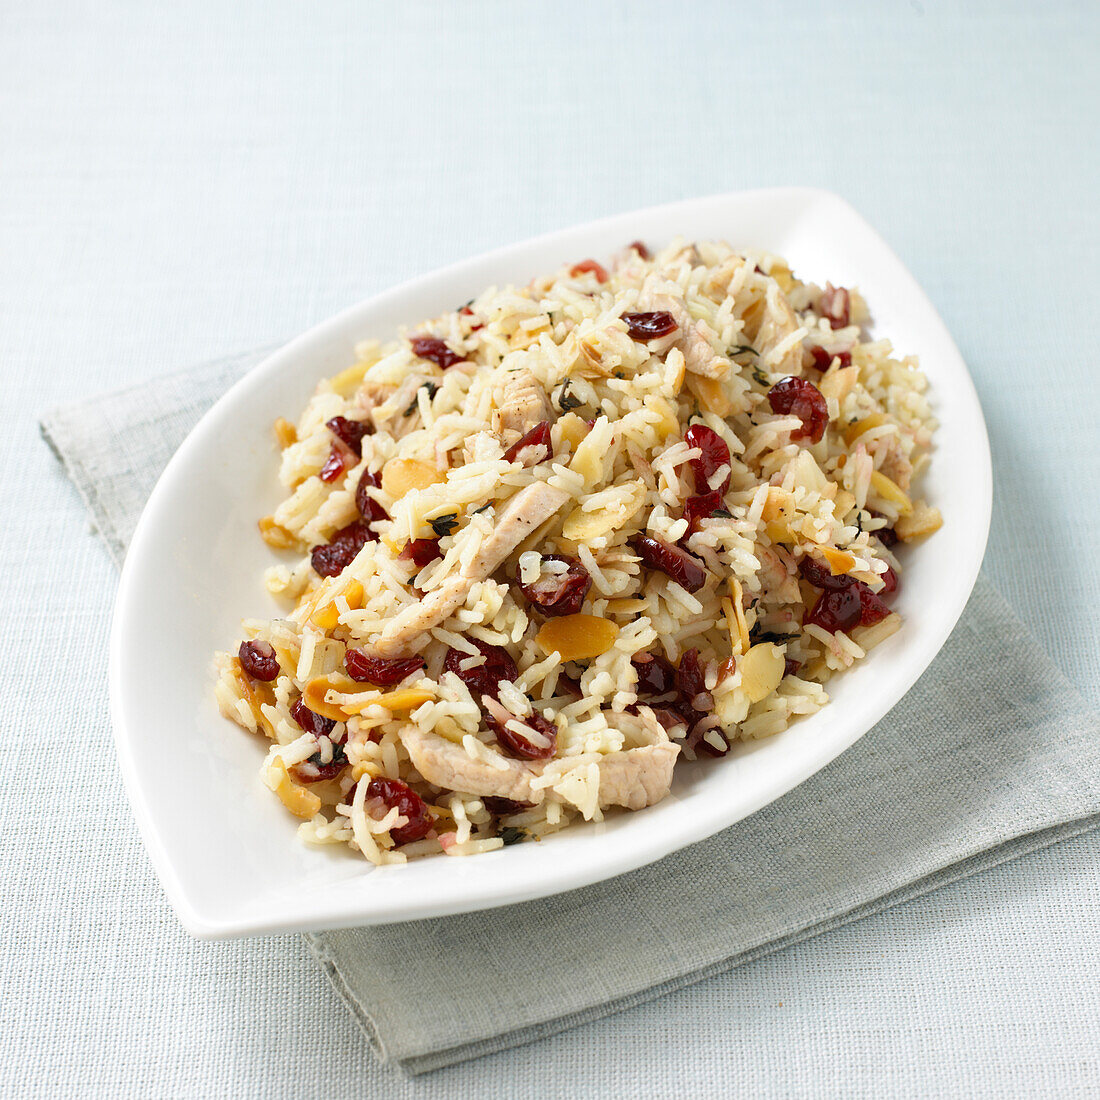 Turkey, almond, and cranberry pilaf